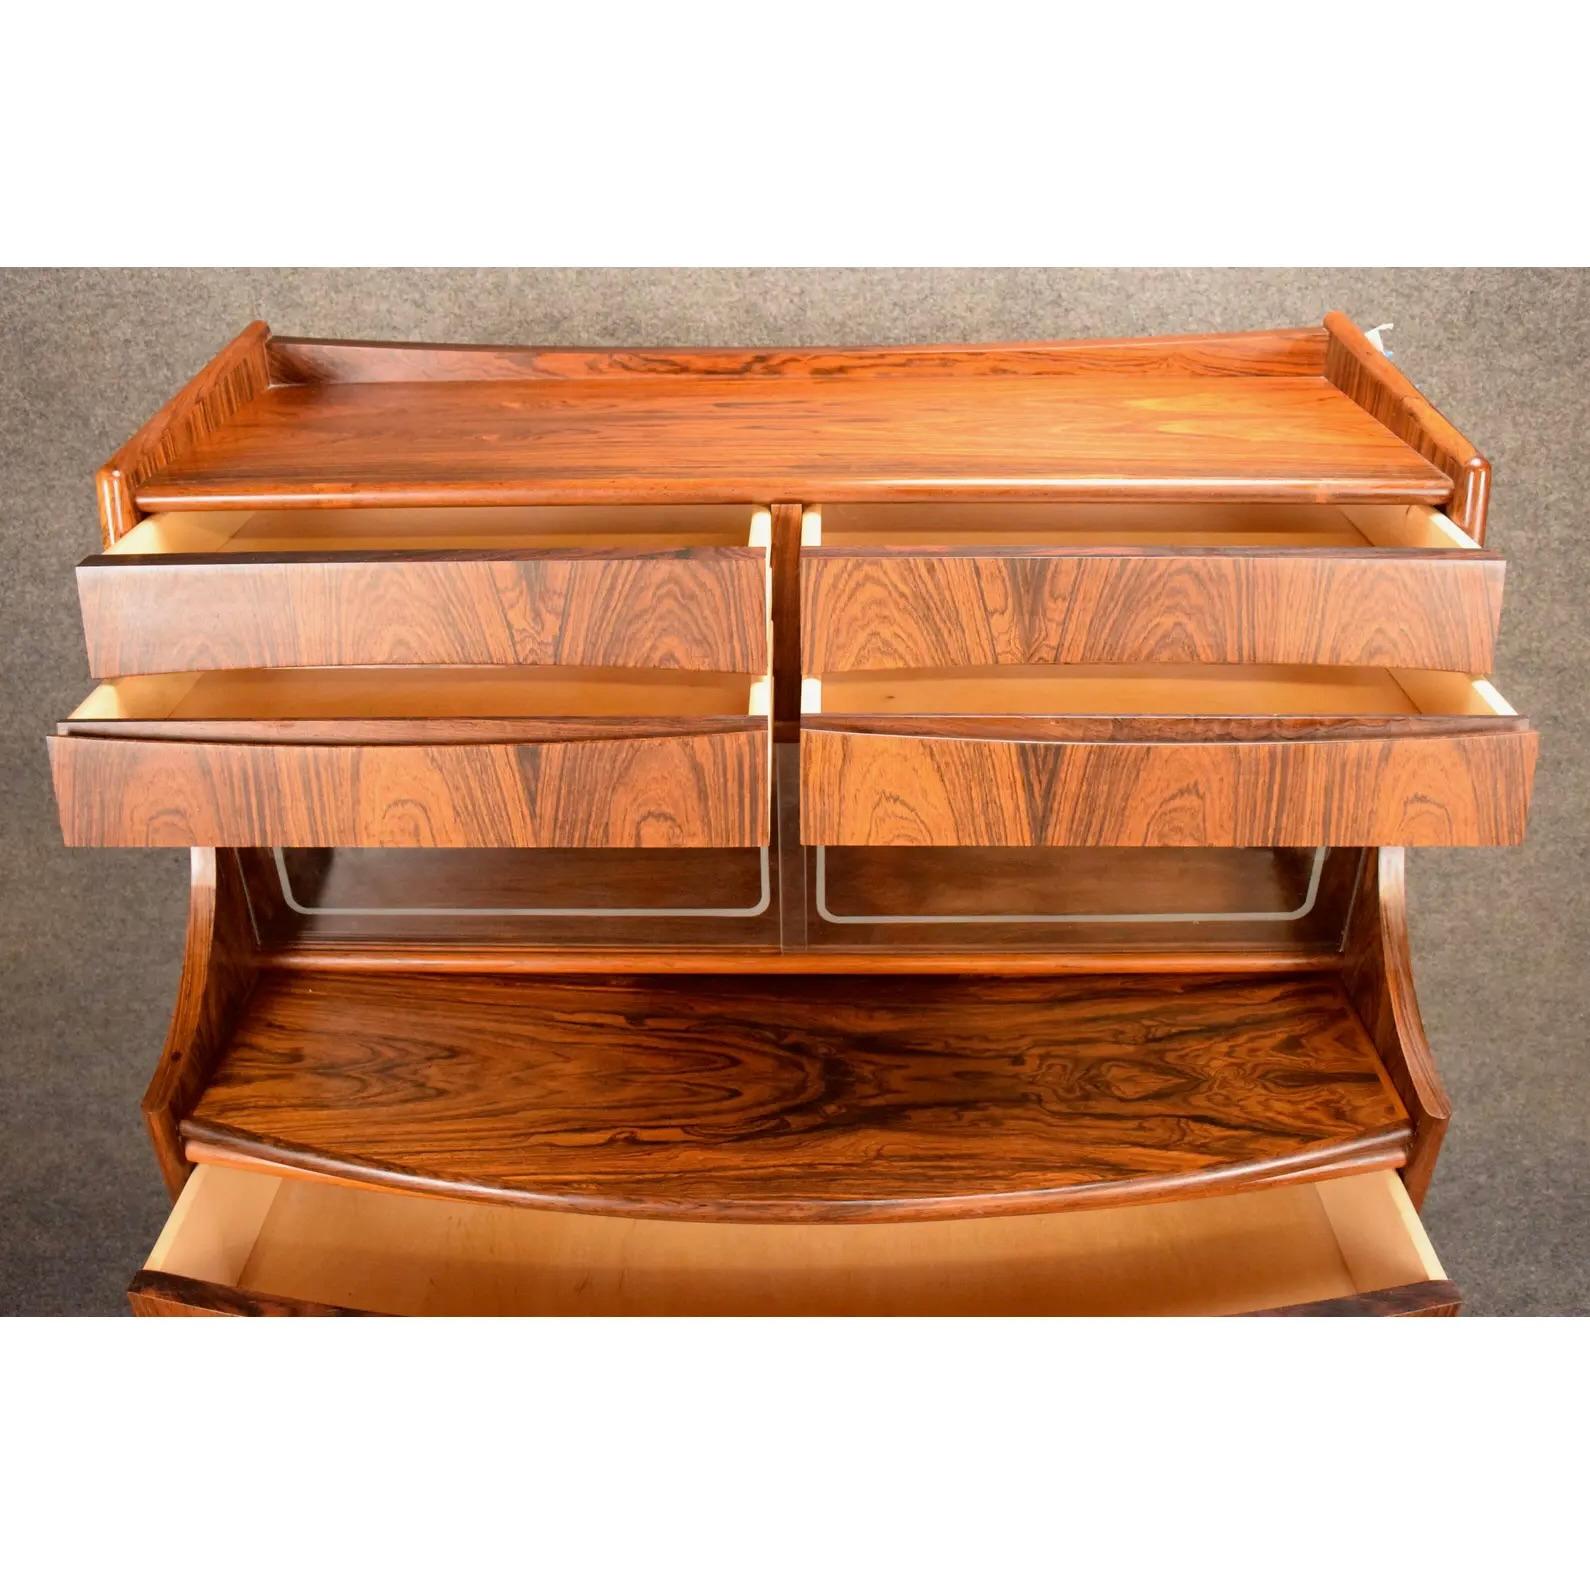 Vintage Danish Mid Century Modern Rosewood Secretary Desk by Falsig Mobler In Good Condition For Sale In San Marcos, CA